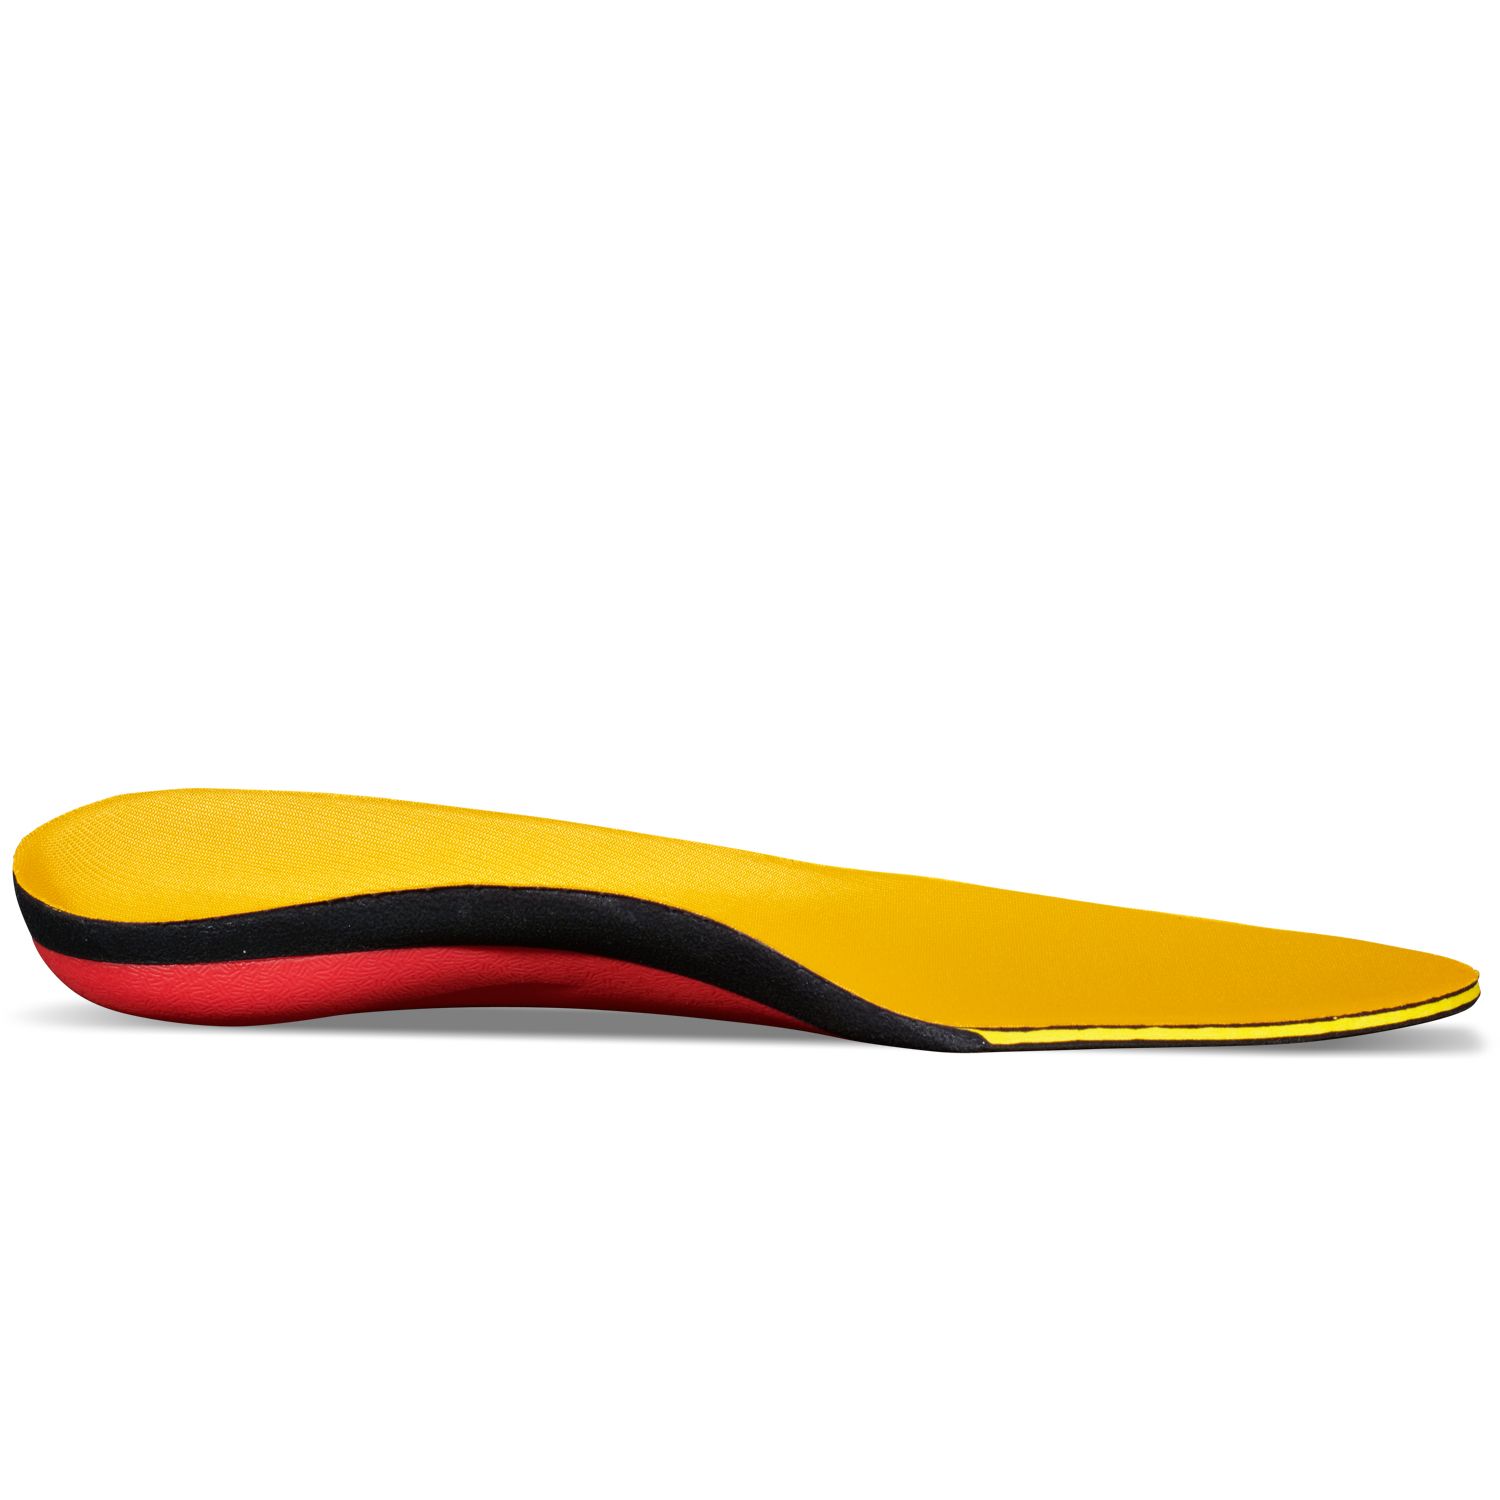 solelution high arch orthotics side view